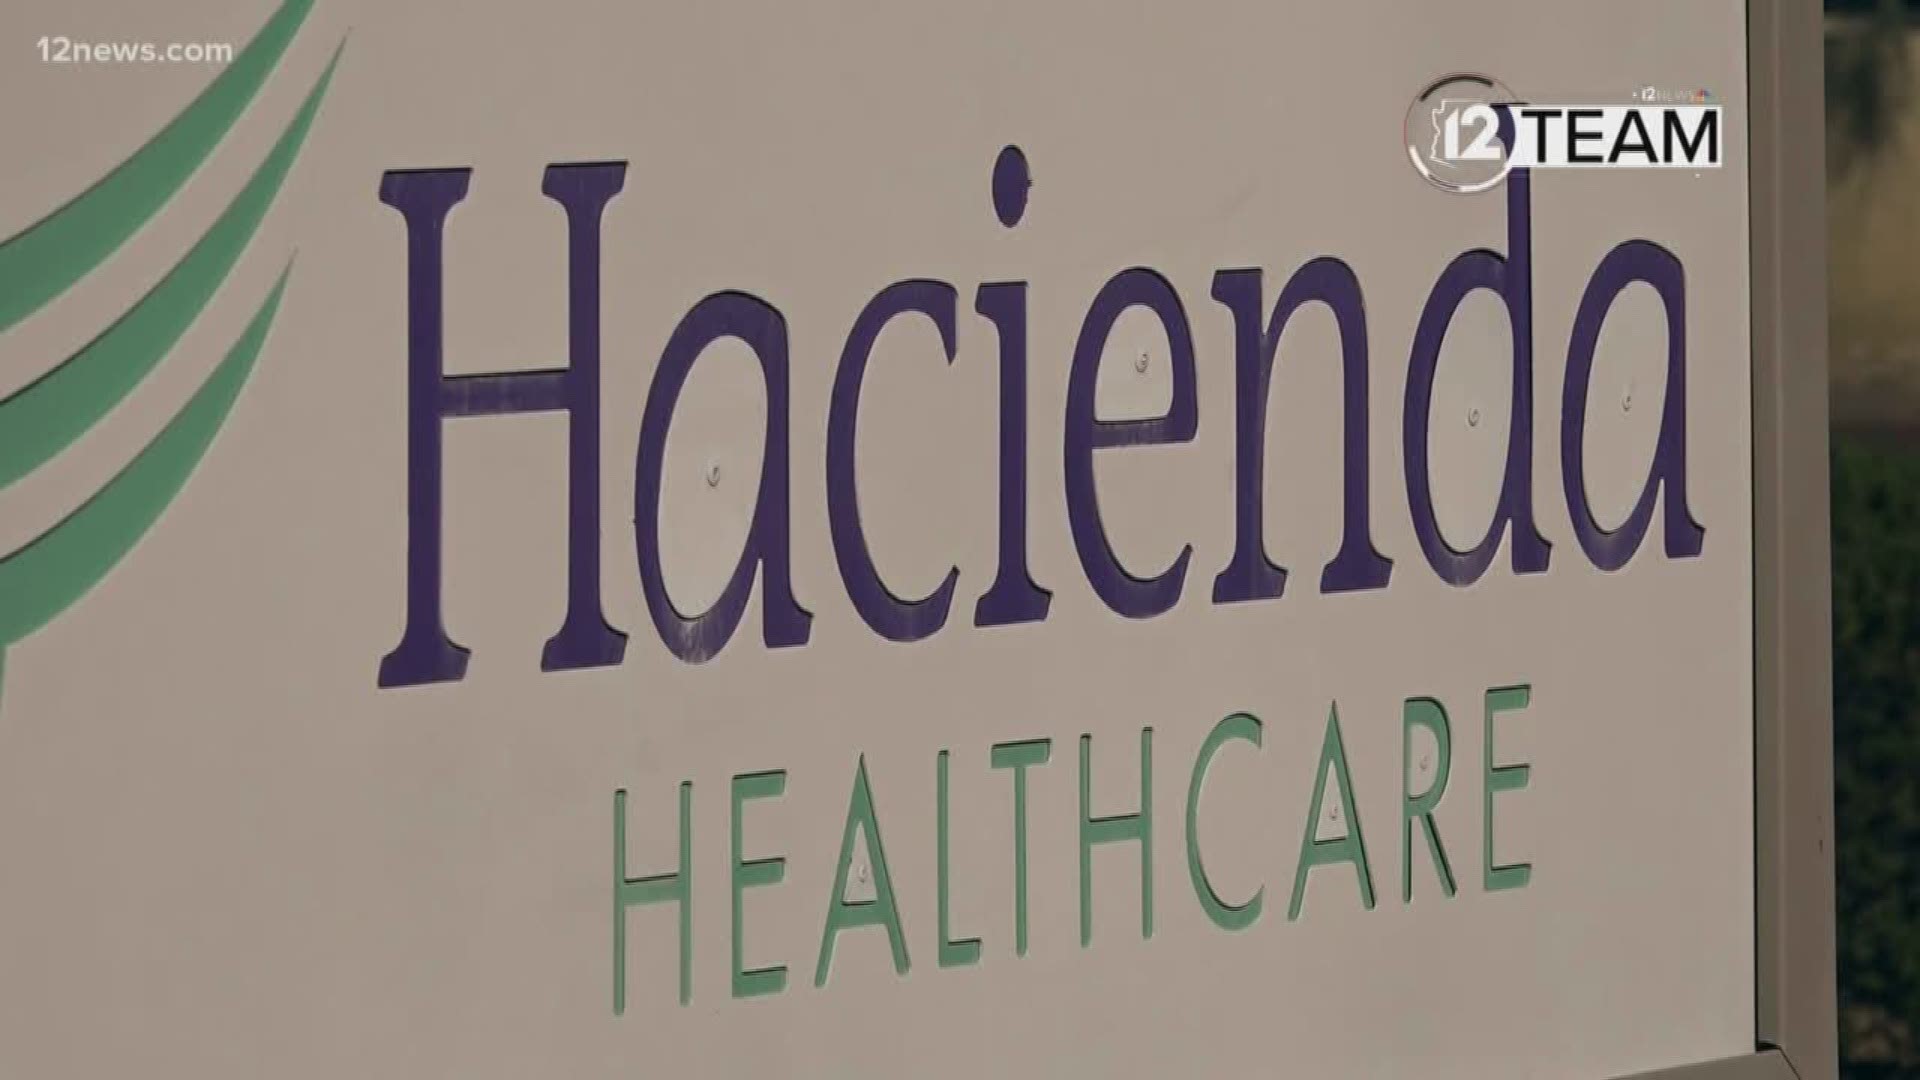 This week's notice of claim against Hacienda Healthcare has raised new questions about just what happened at the clinic before an incapacitated woman gave birth in December. The care center is defending itself against that accusation that they went against the family's wishes that only female staff could care for the woman.